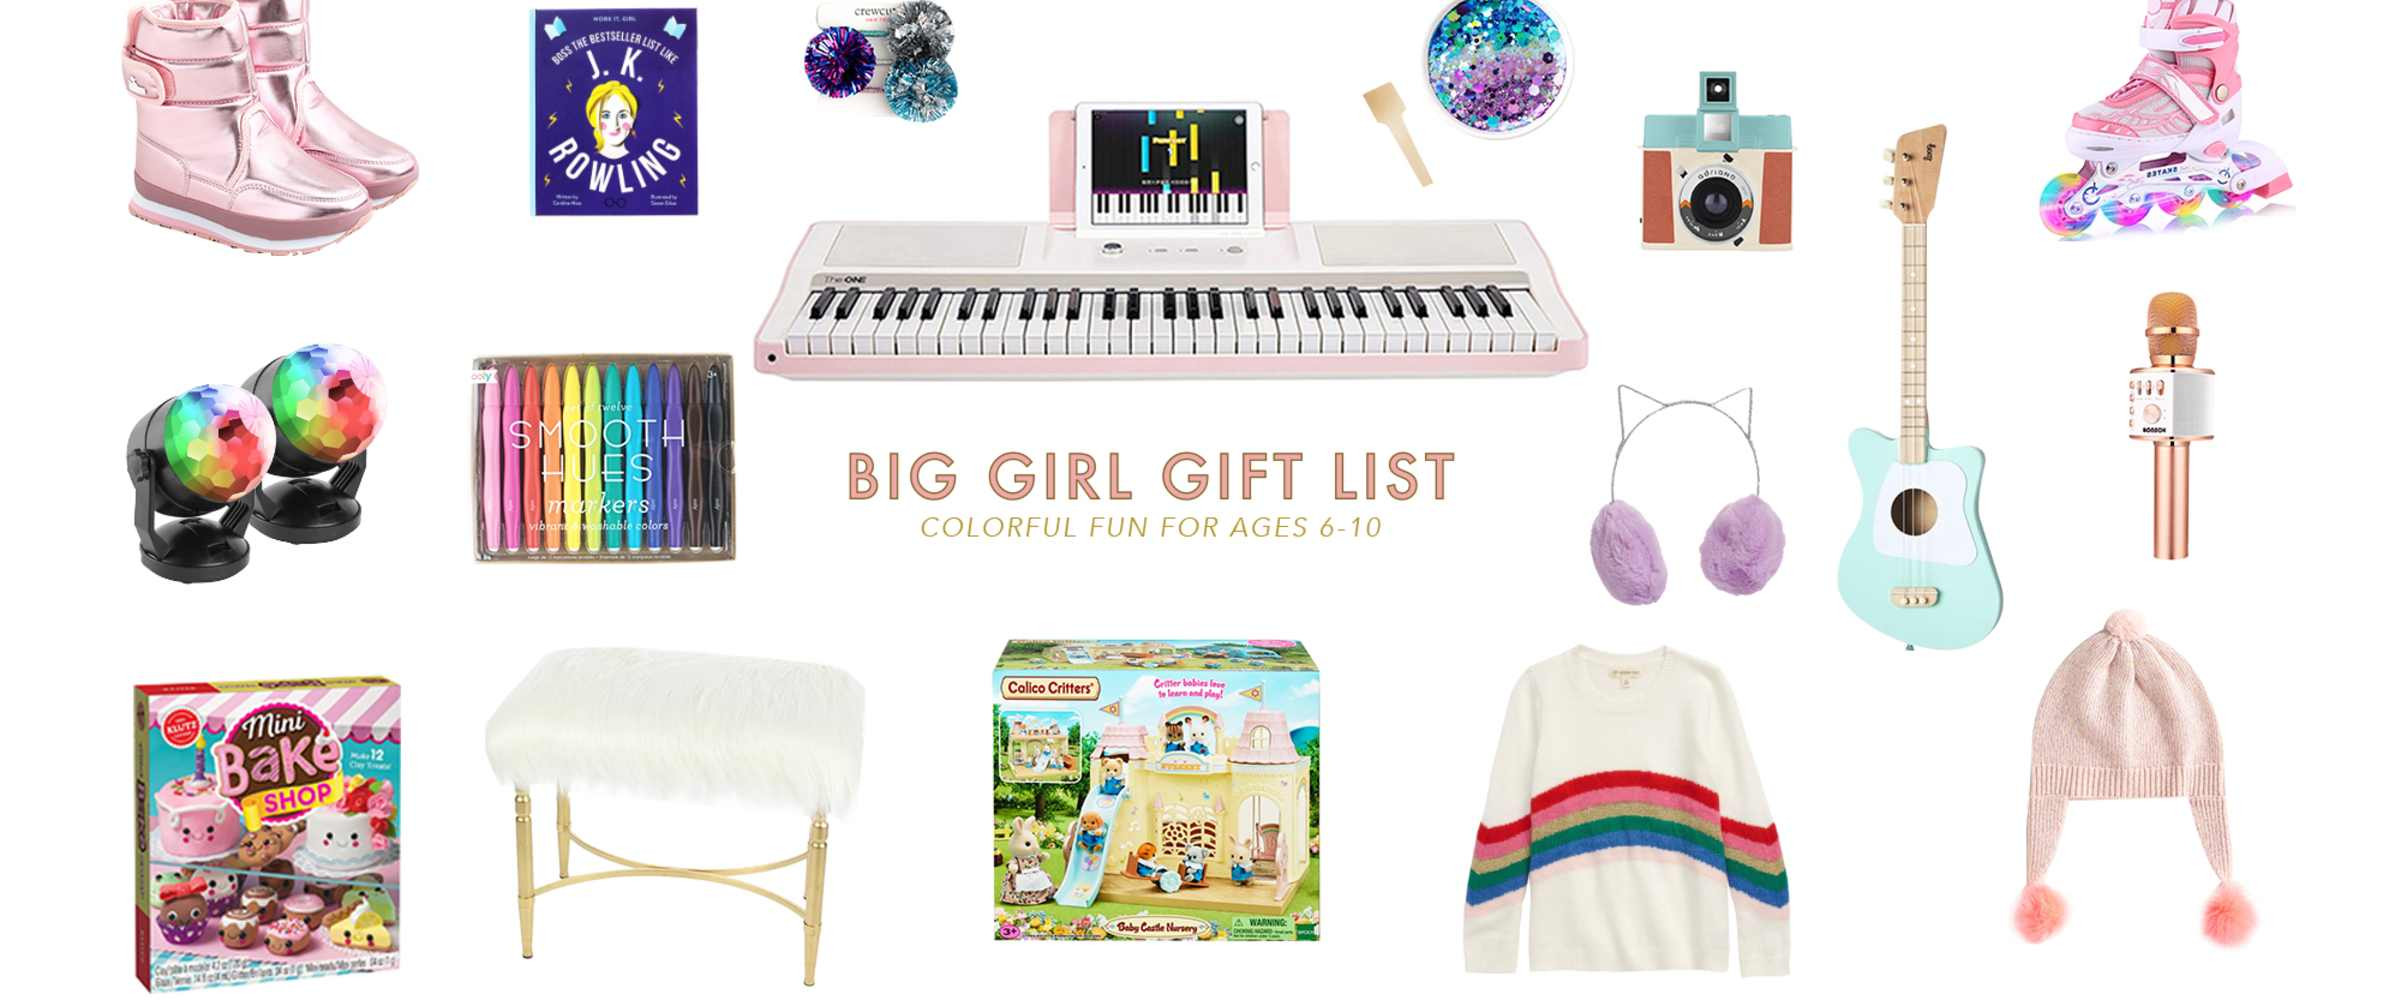 Big Christmas Gift Ideas
 Christmas Gift Ideas For Big Girls Ages 6 10 Lay Baby Lay